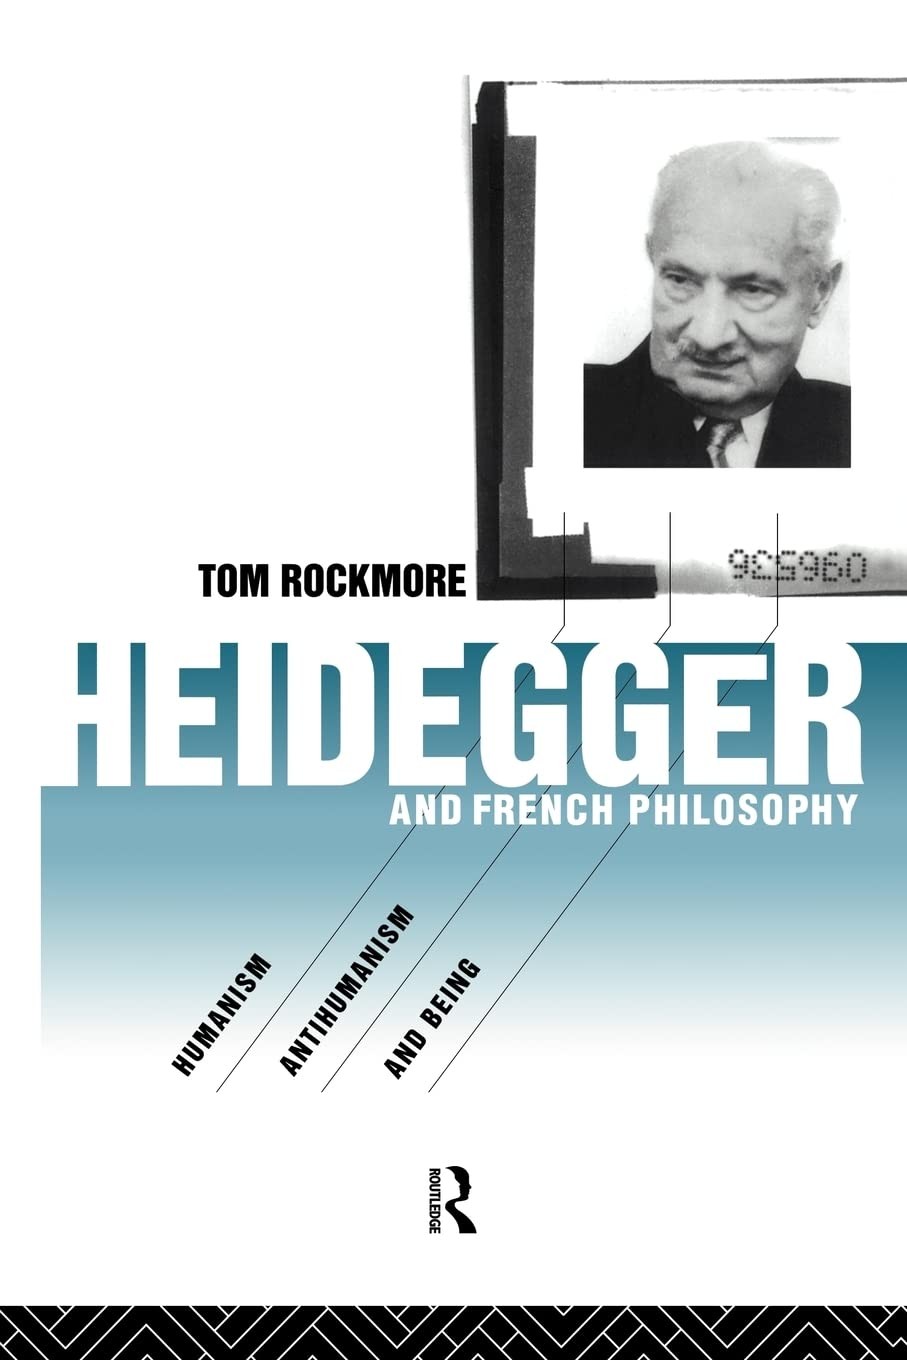 Heidegger and French Philosophy: Humanism, Antihumanism, and Being